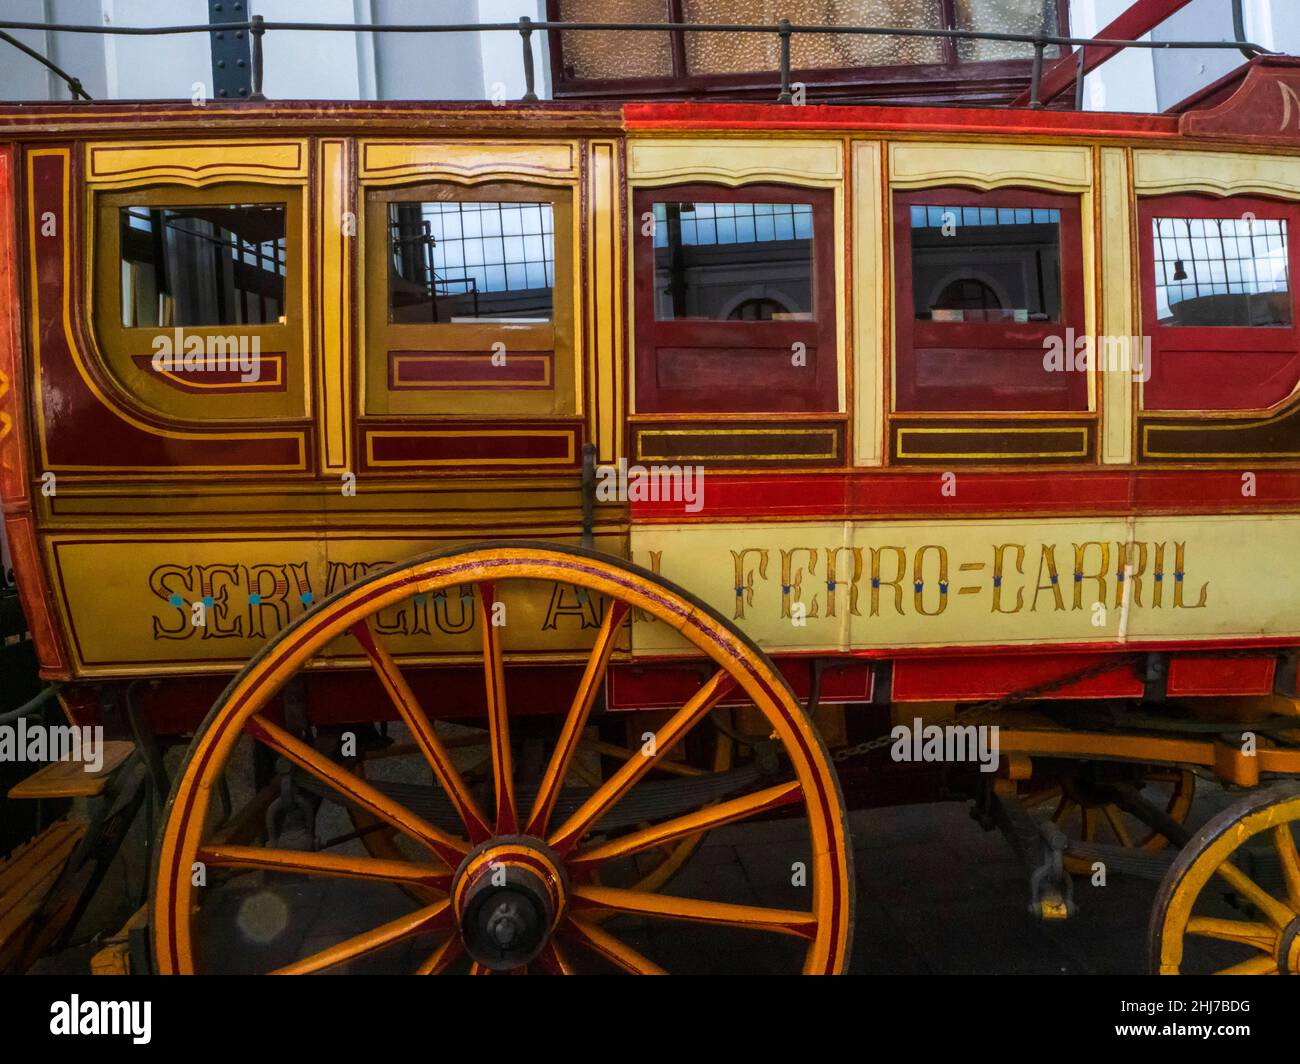 Old wooden railway carriage with wheels Stock Photo